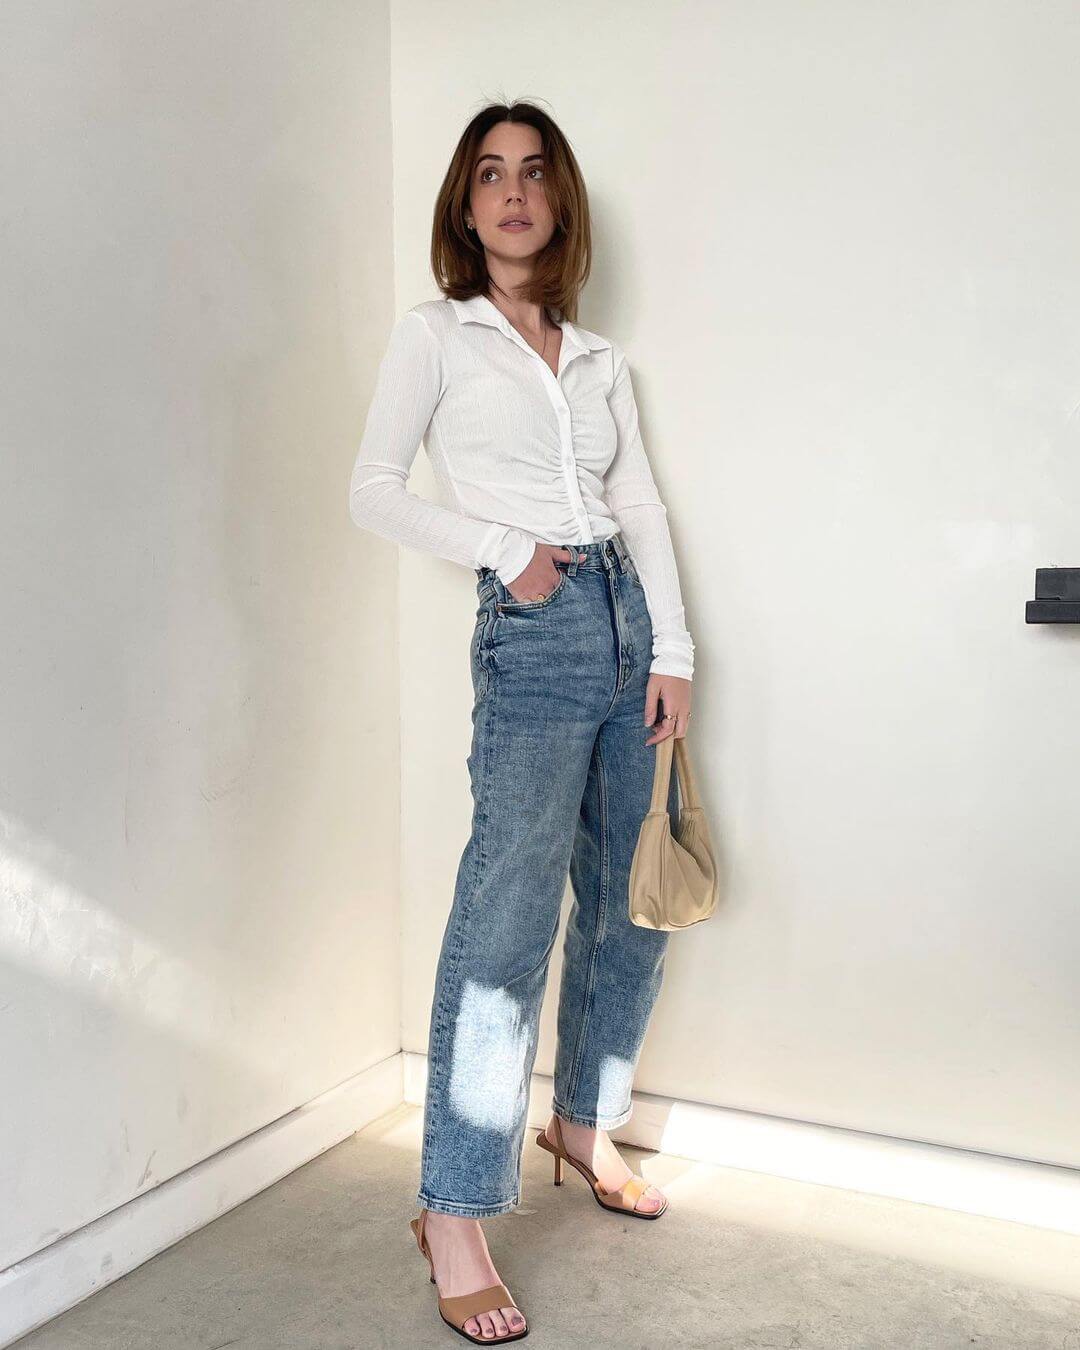 Adelaide  Chic & Comfy Summer Look In White Blouse With Blue Denim Jeans